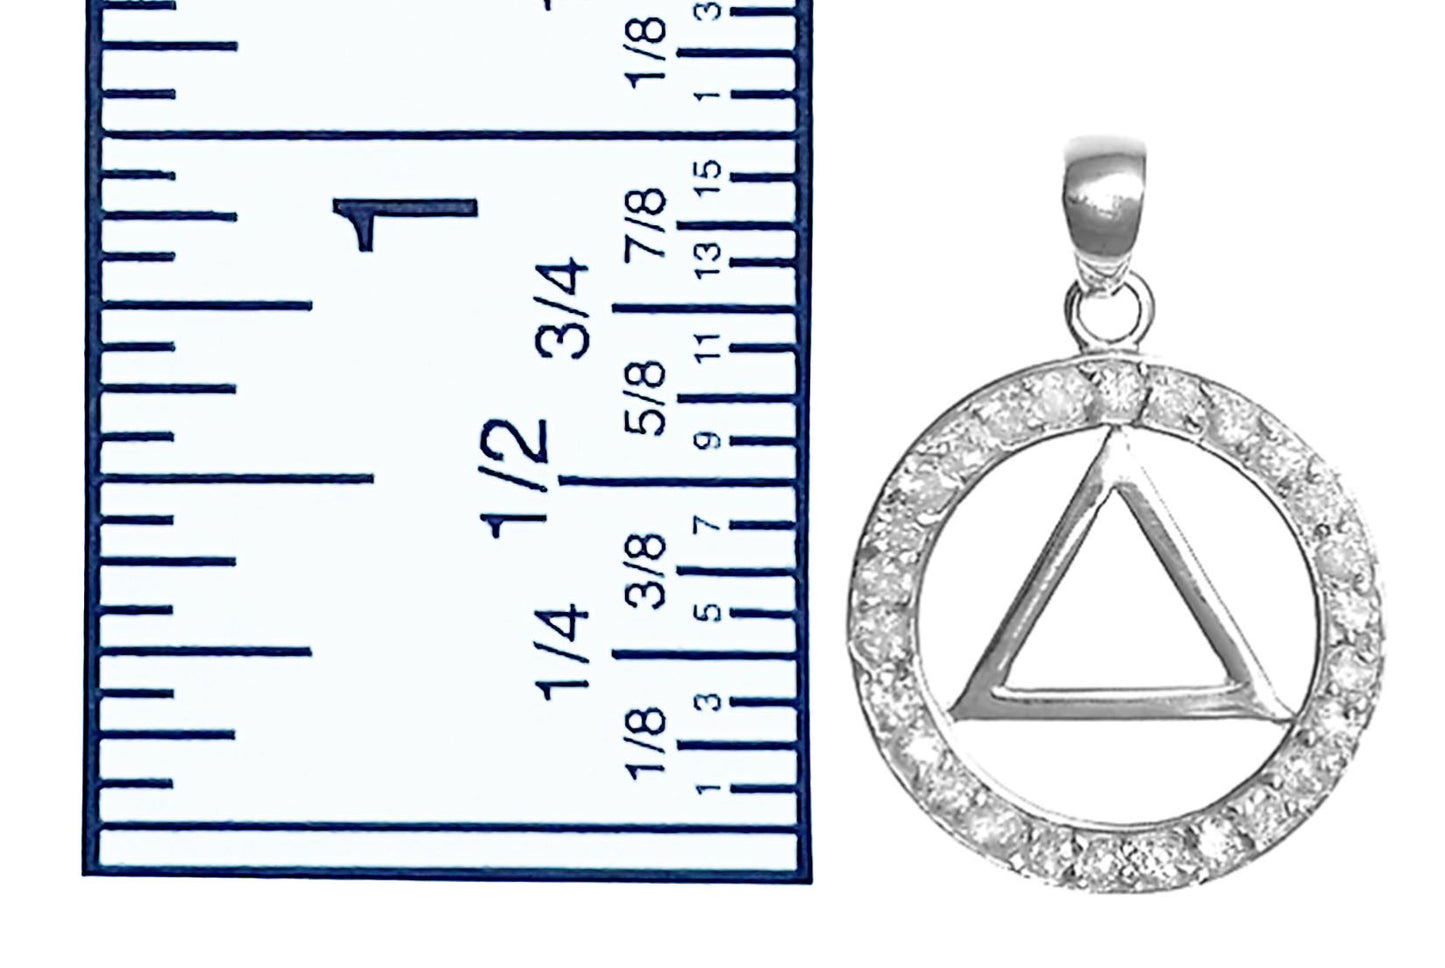 Narcotics Anonymous Sparkly Pendant, Sterling Silver